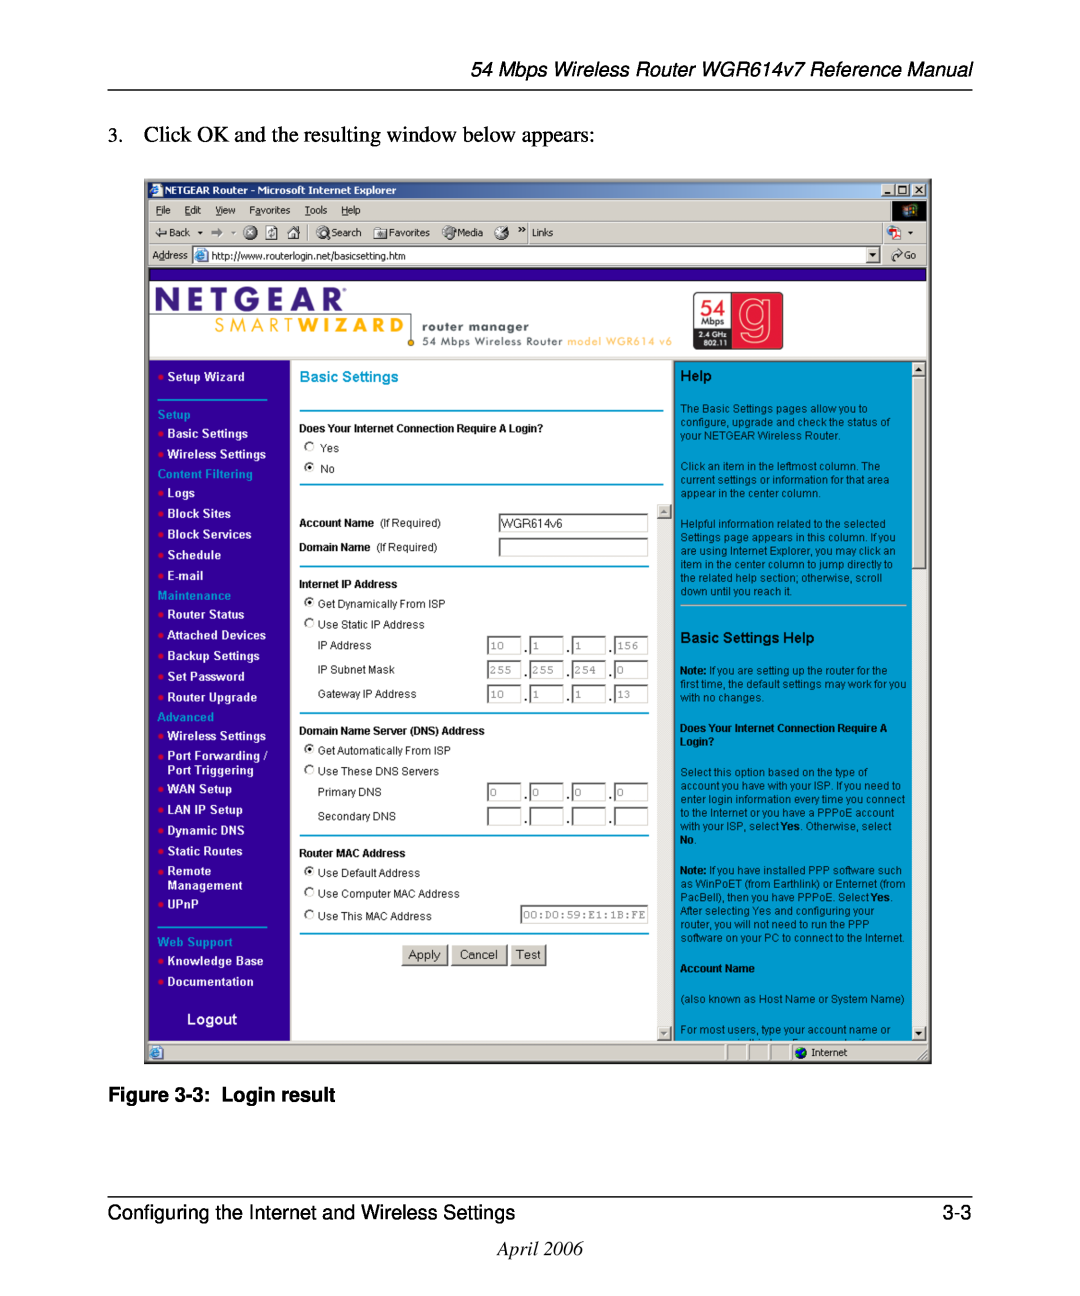 NETGEAR Click OK and the resulting window below appears, Mbps Wireless Router WGR614v7 Reference Manual, 3 Login result 